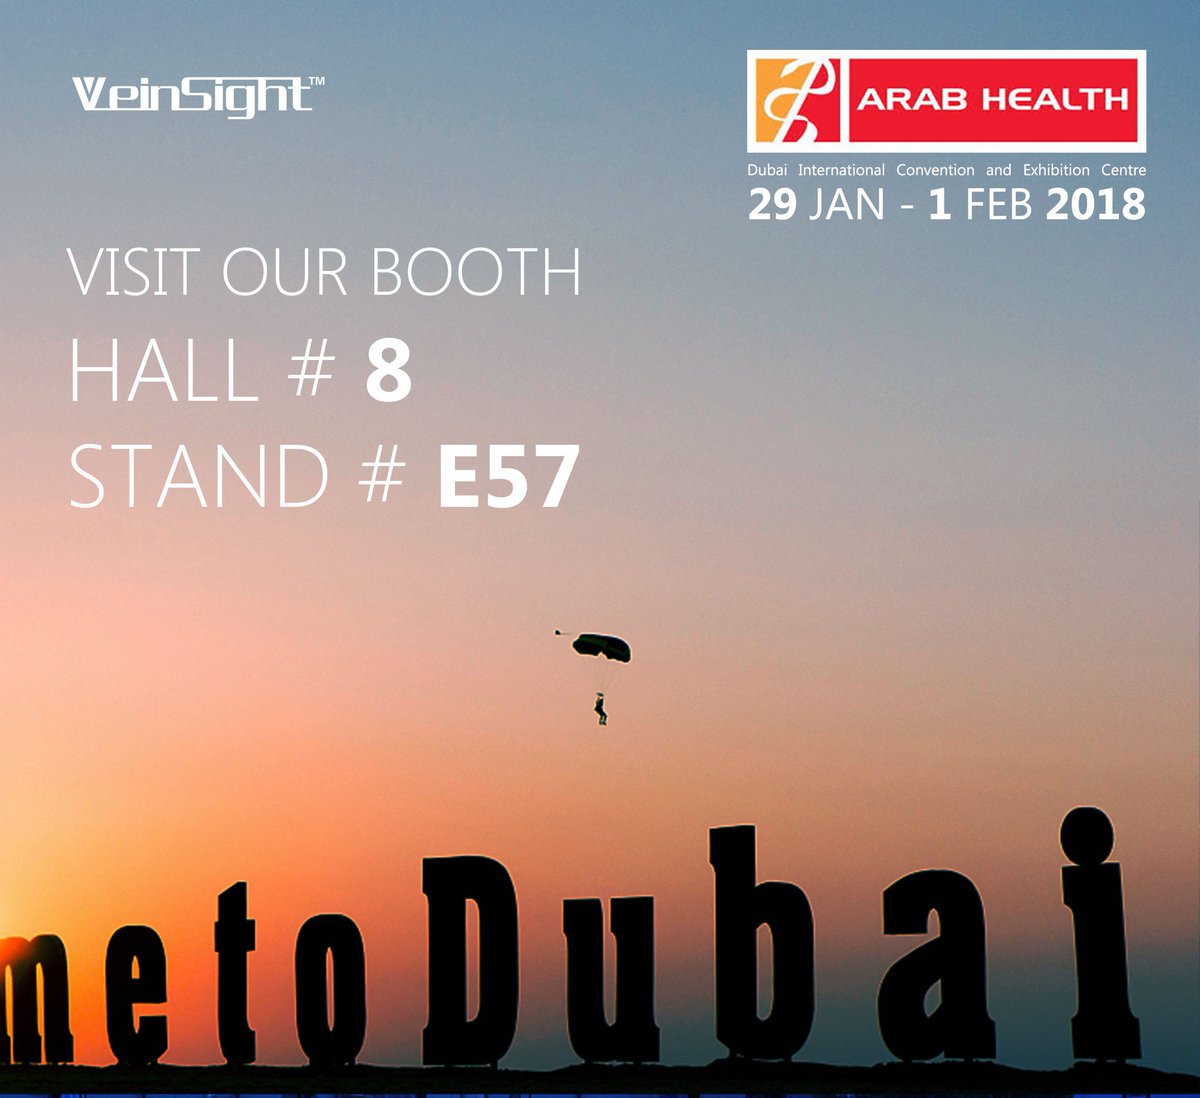 #ArabHealth Excited to announce we will be at 2018 from 29th Jan to 4th Feb. Would you be interested to know more about Vein Technology, looking forward to seeing you. you.www.veinsight.com/en #Congress #SuLinda_Confrences #Dubai #exhibition #medical #trade #fair